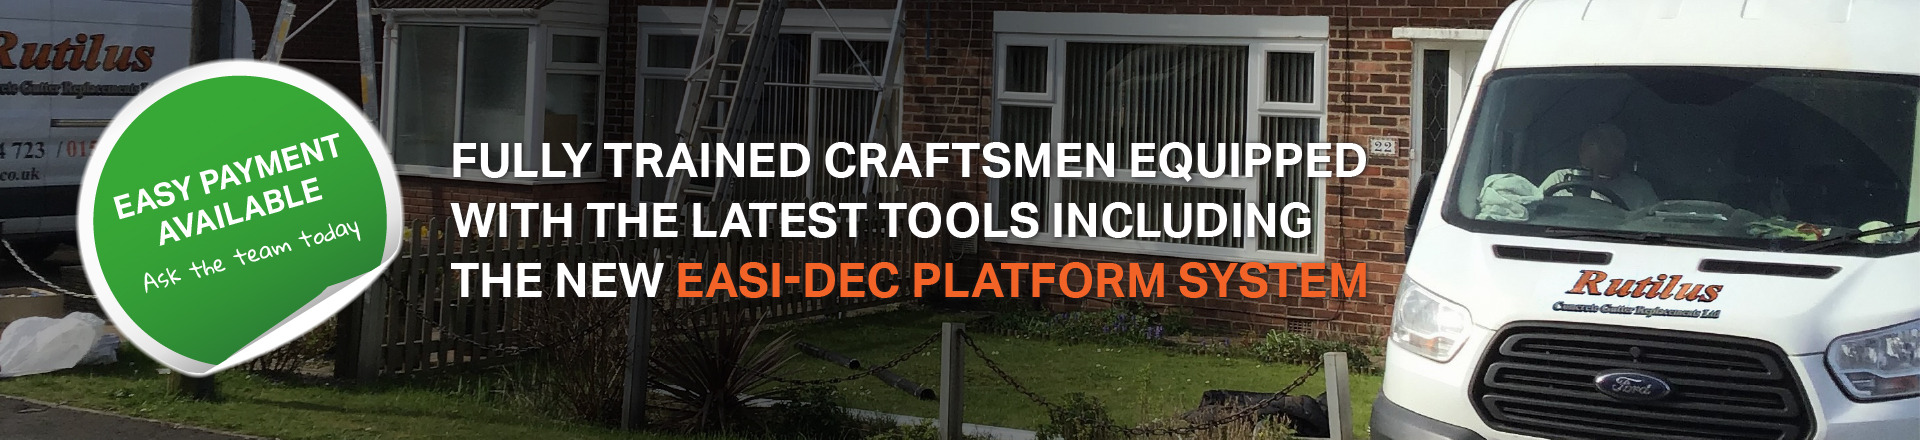 Concrete Gutter Replacement Specialists. Fully trained craftsmen equipped with the latest tools including the new easi-dec platform system